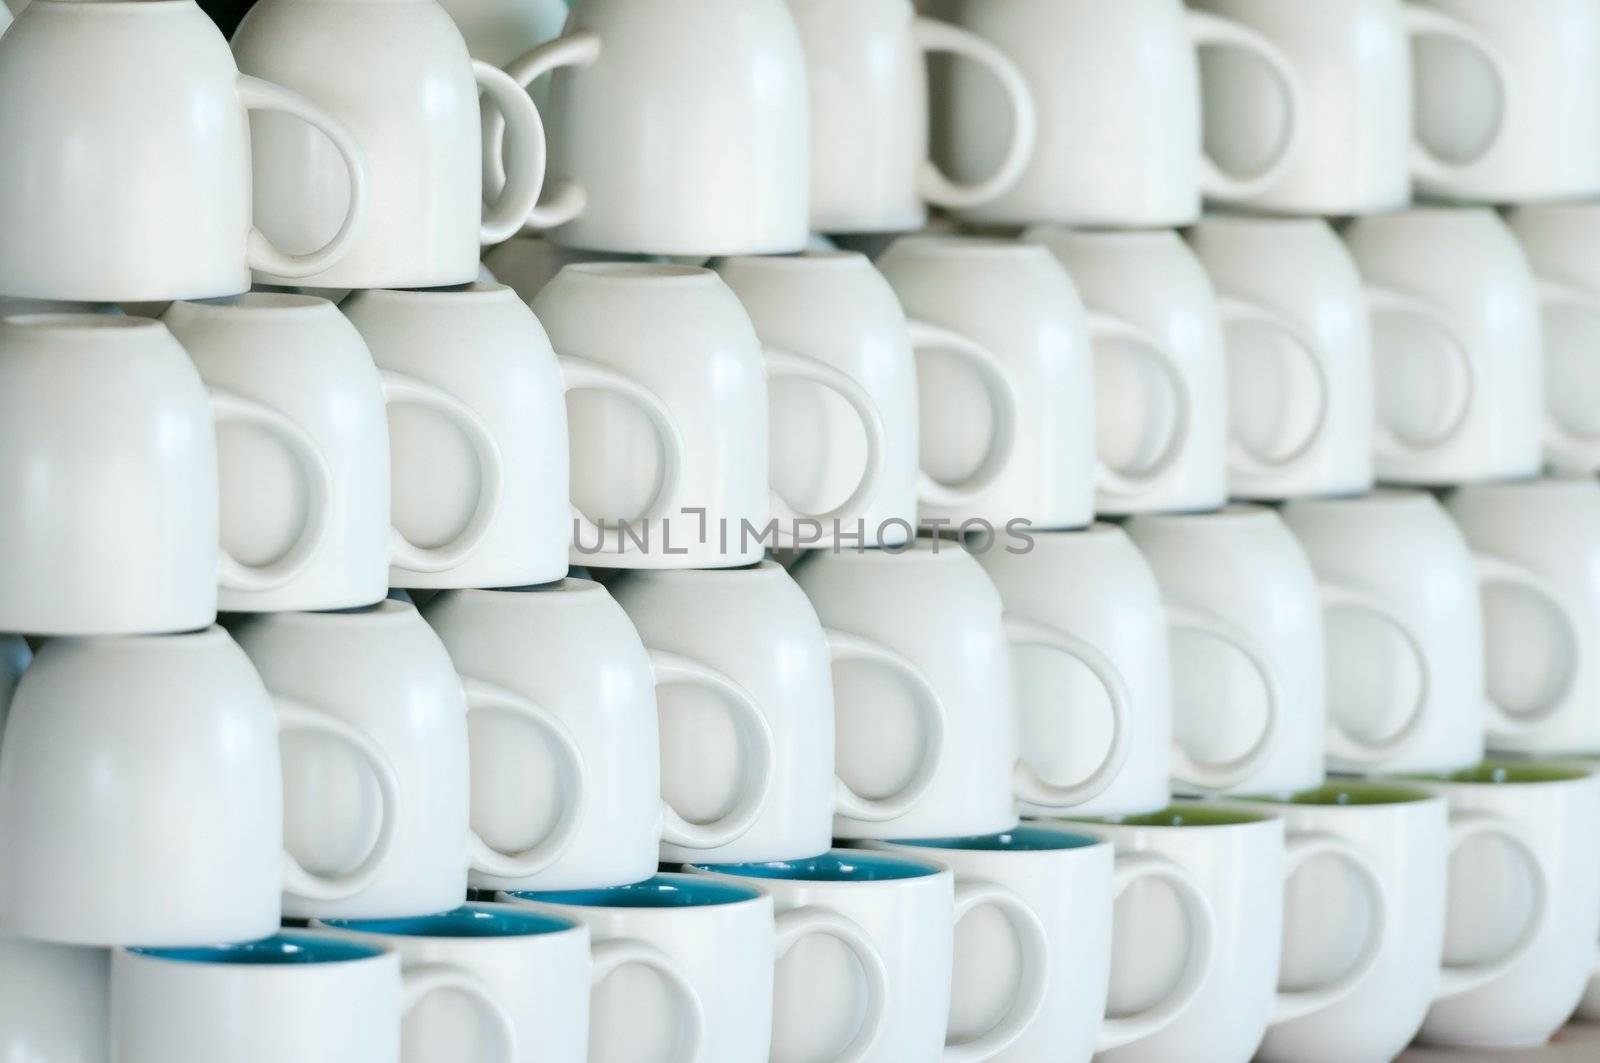 Shop counter with white cups lines. Shallow depth of field with selective focus on a left third